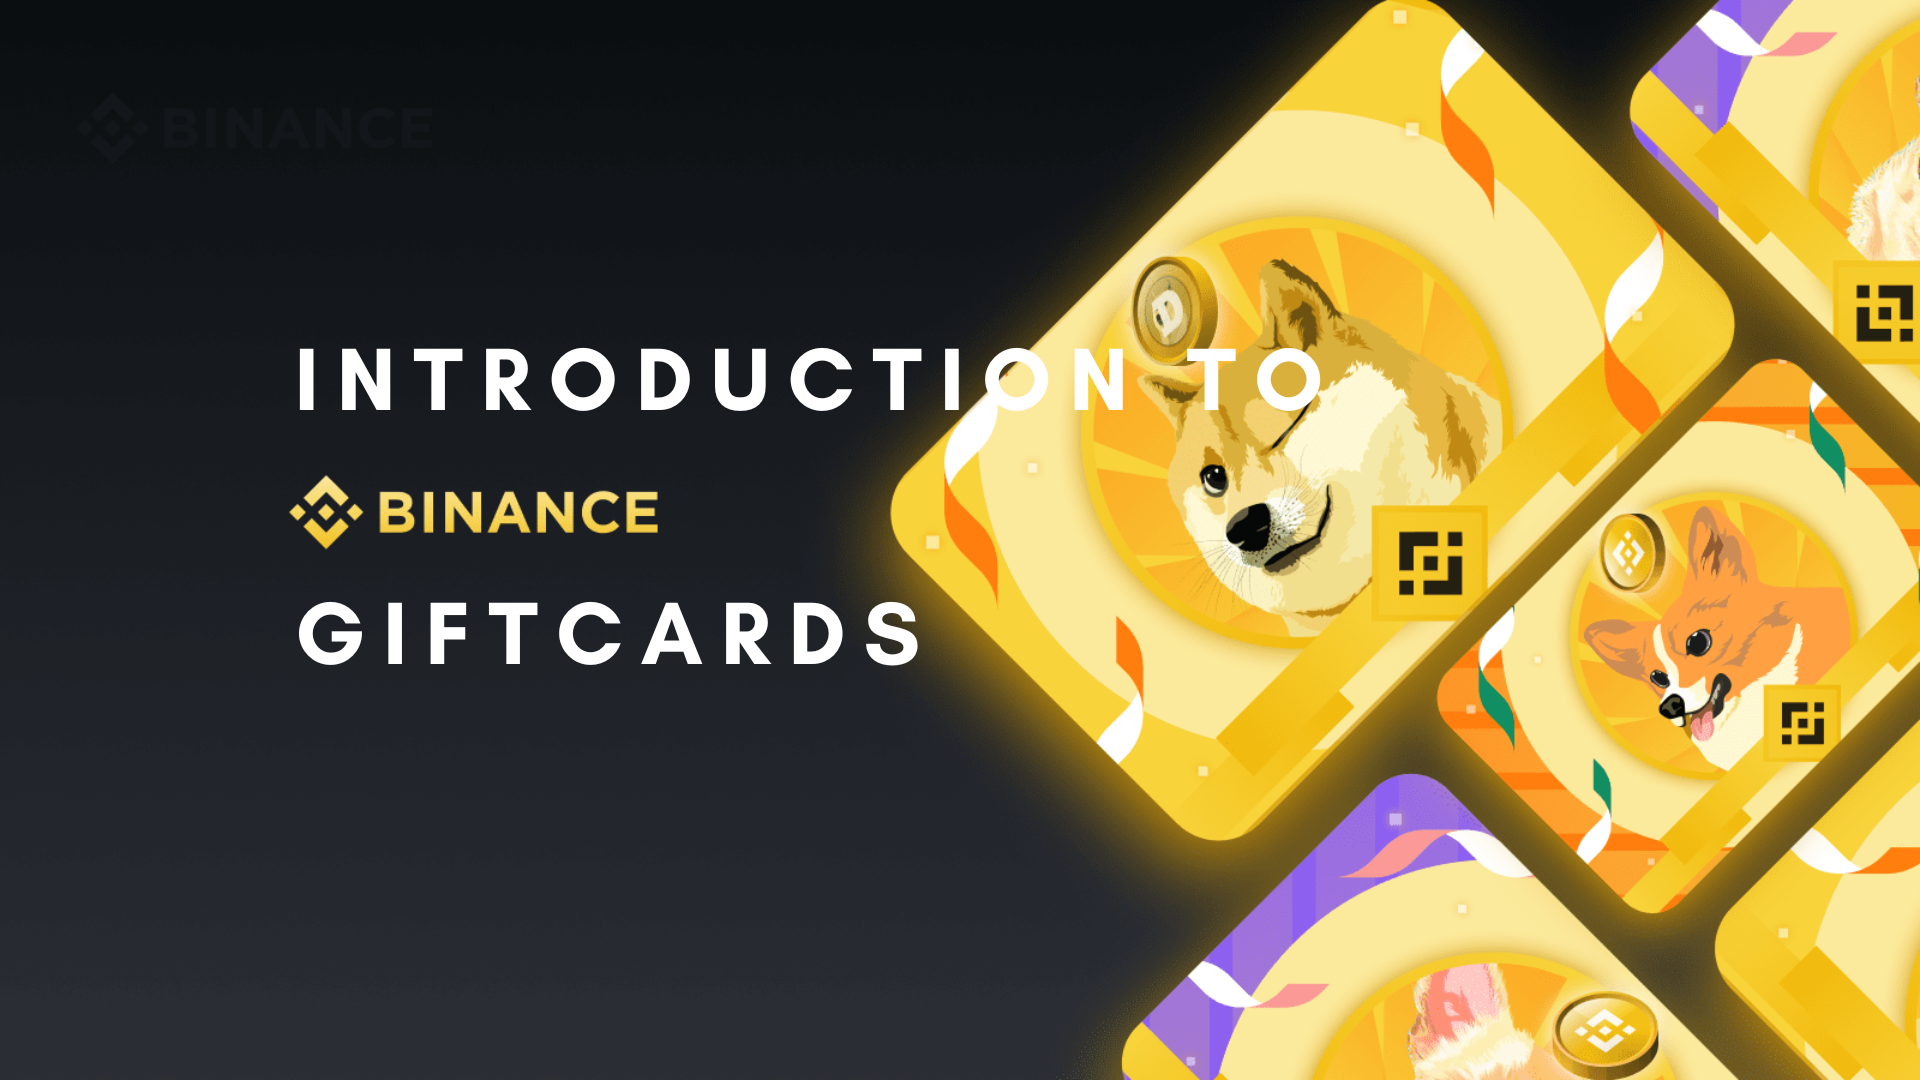 Introduction to giftcards